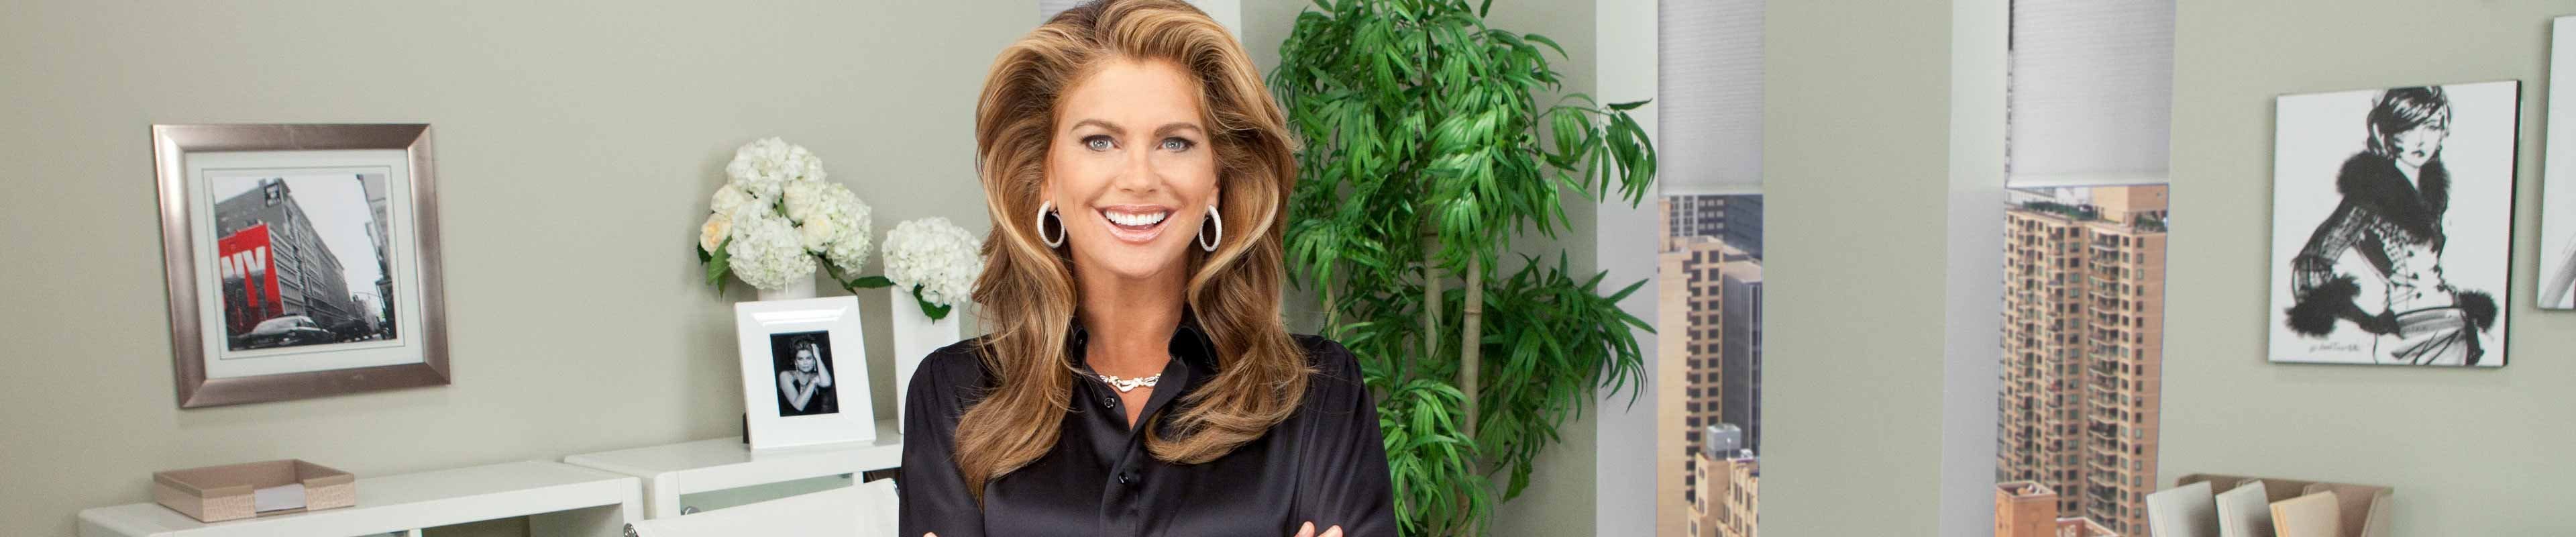 Kathy Ireland smiling in a room